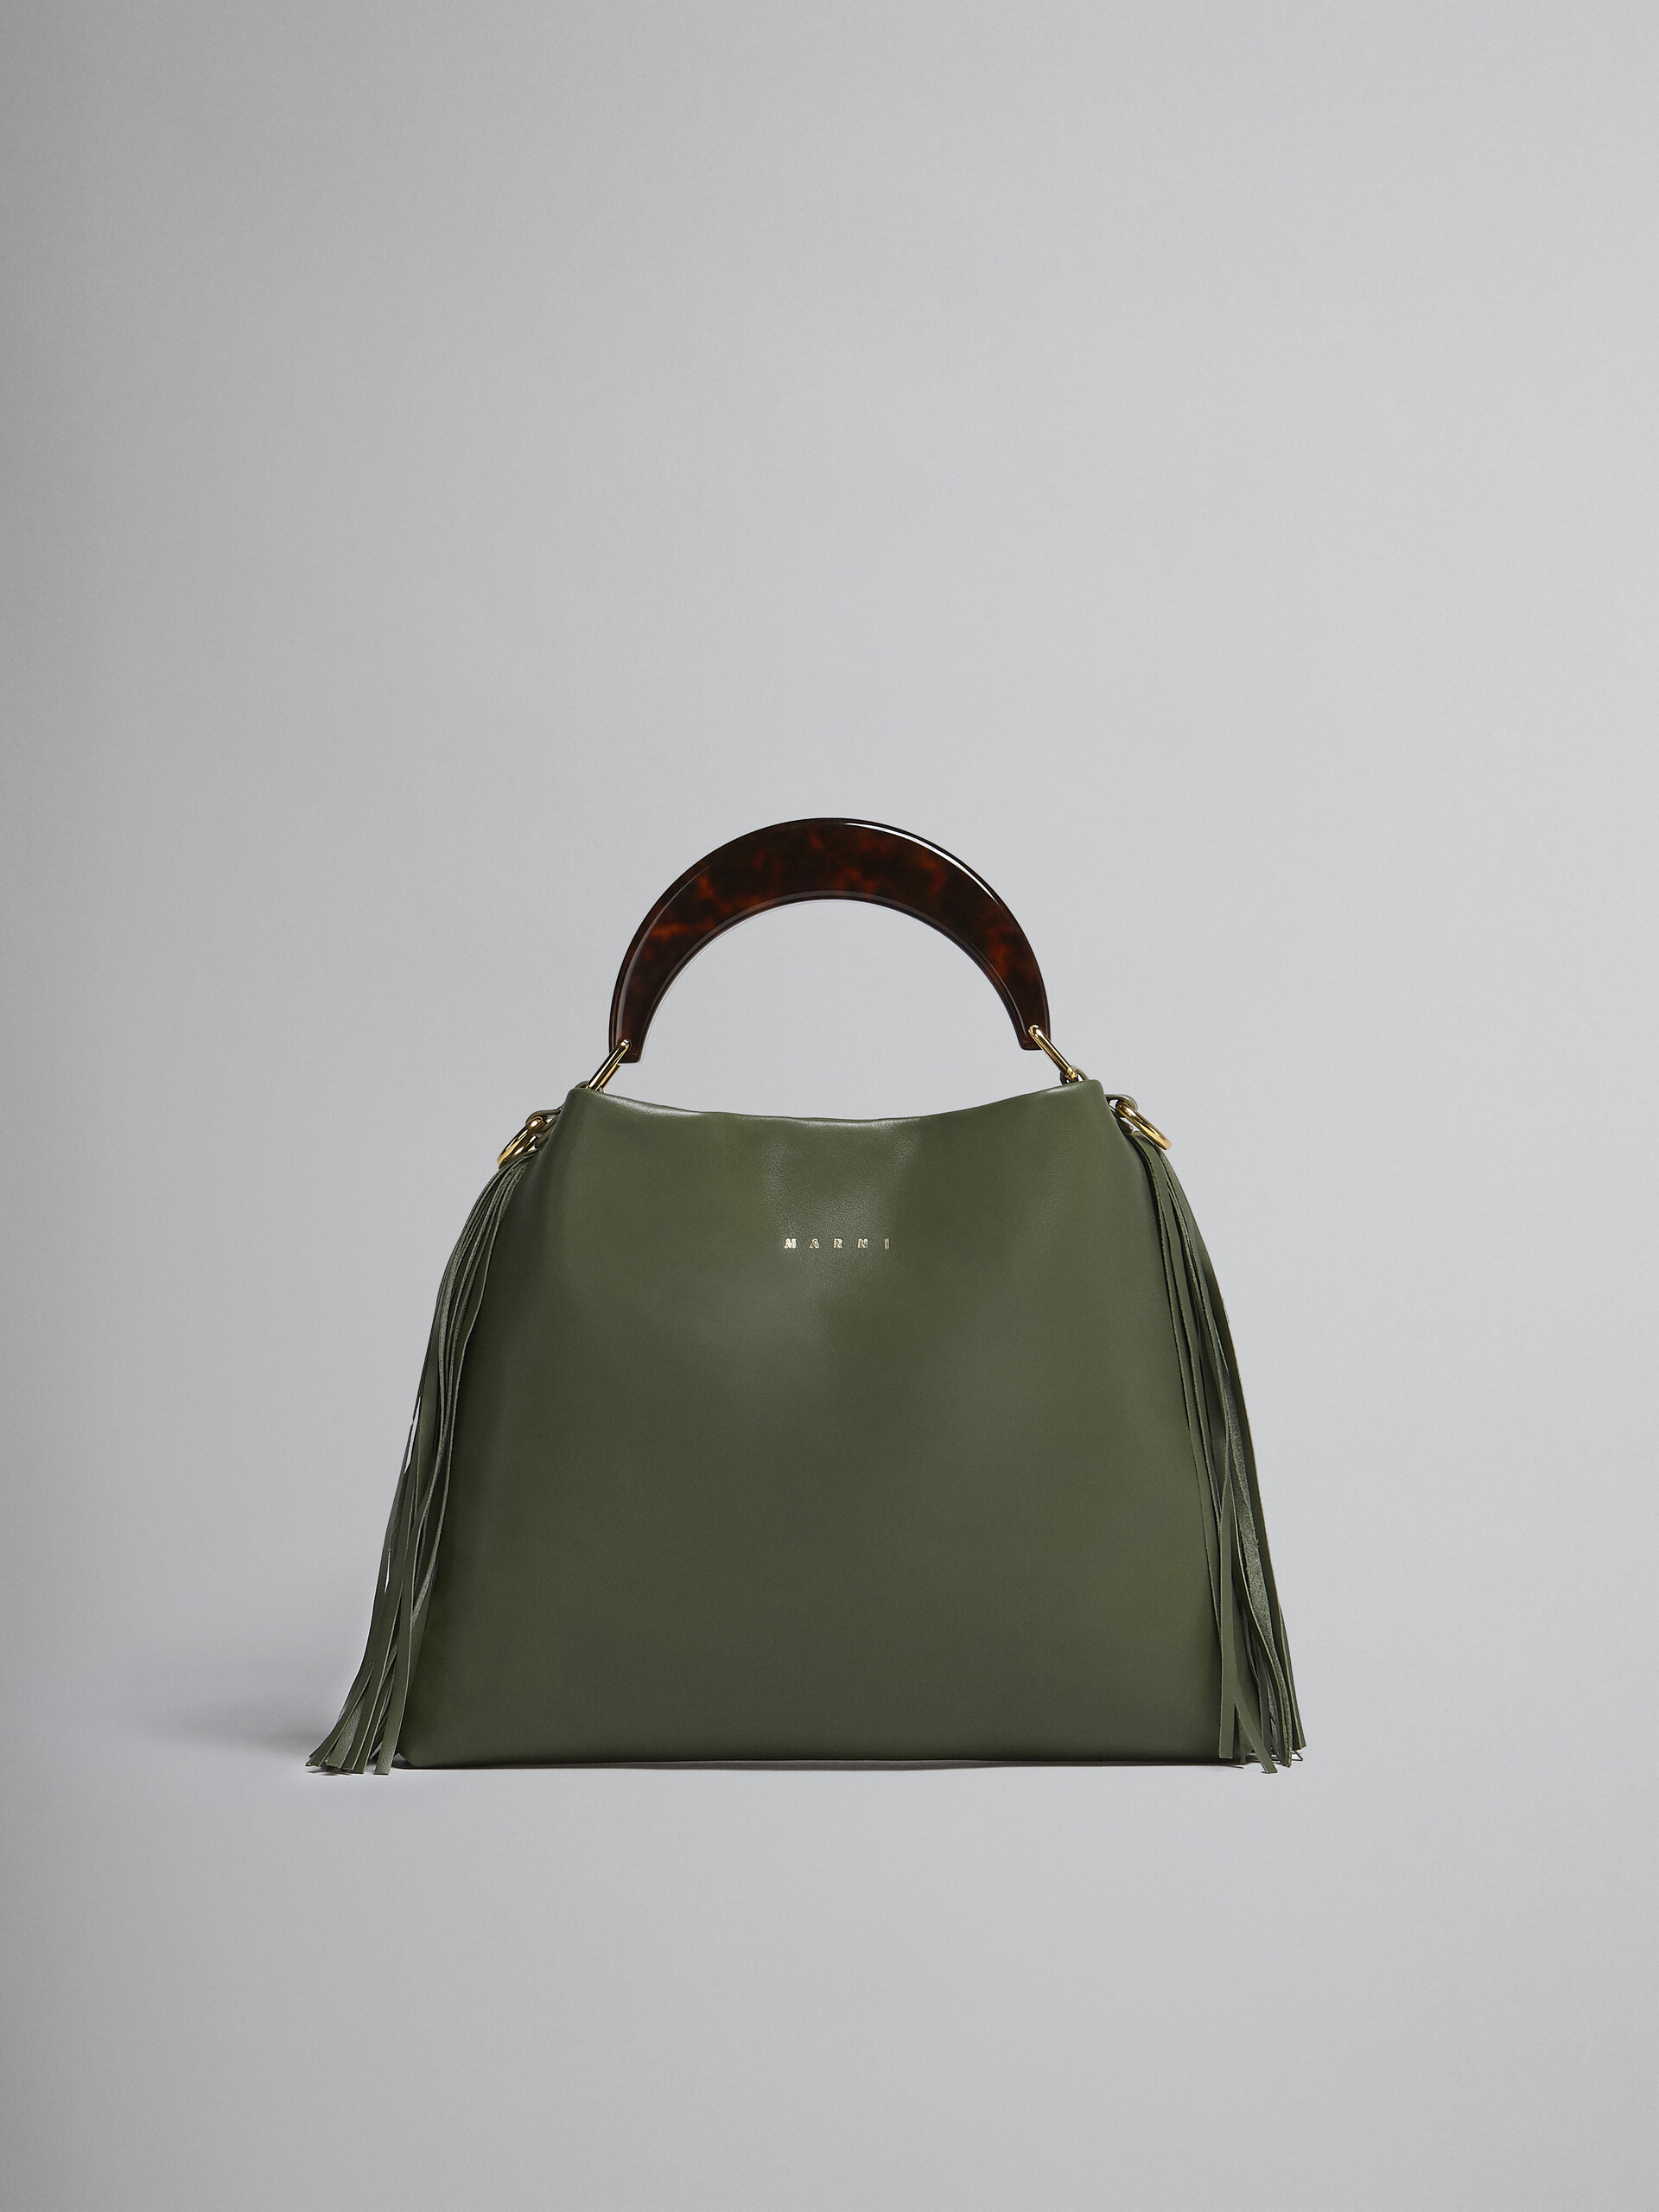 Venice Small Bag in green leather with fringes - Shoulder Bags - Image 1